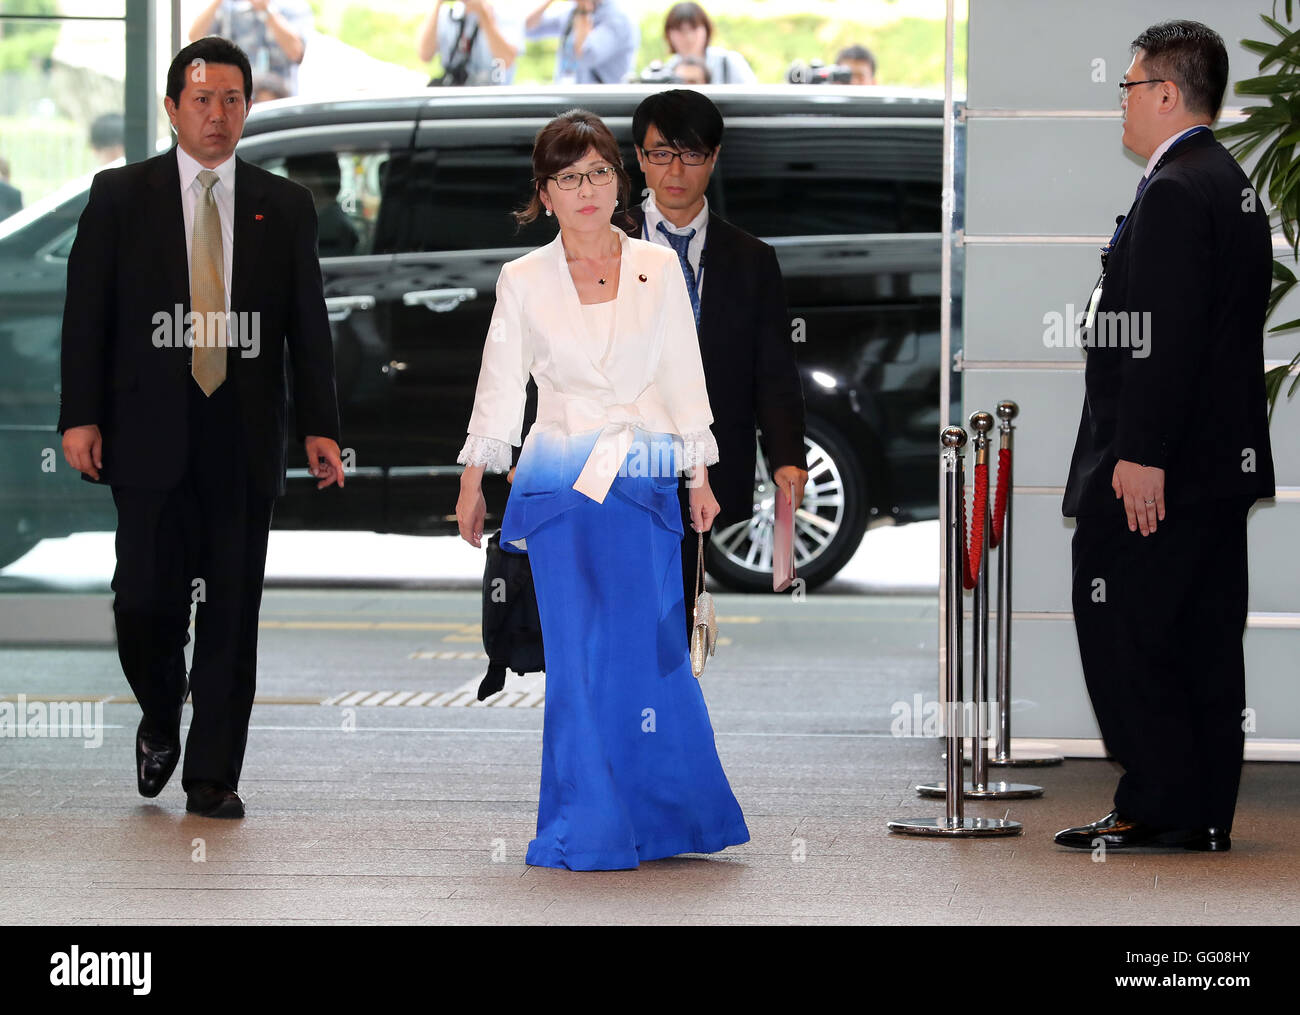 Tokyo, Japan. 3rd Aug, 2016. Newly appointed Japanese Defense Minister Tomomi Inada arrives at the prime minister's official residence in Tokyo for the inuguration ceremony at the Imperial Palace on Wednesday, August 3, 2016. Japanese Prime Minister Shinzo Abe reshuffled his cabinet members after the Upper House election. © Yoshio Tsunoda/AFLO/Alamy Live News Stock Photo